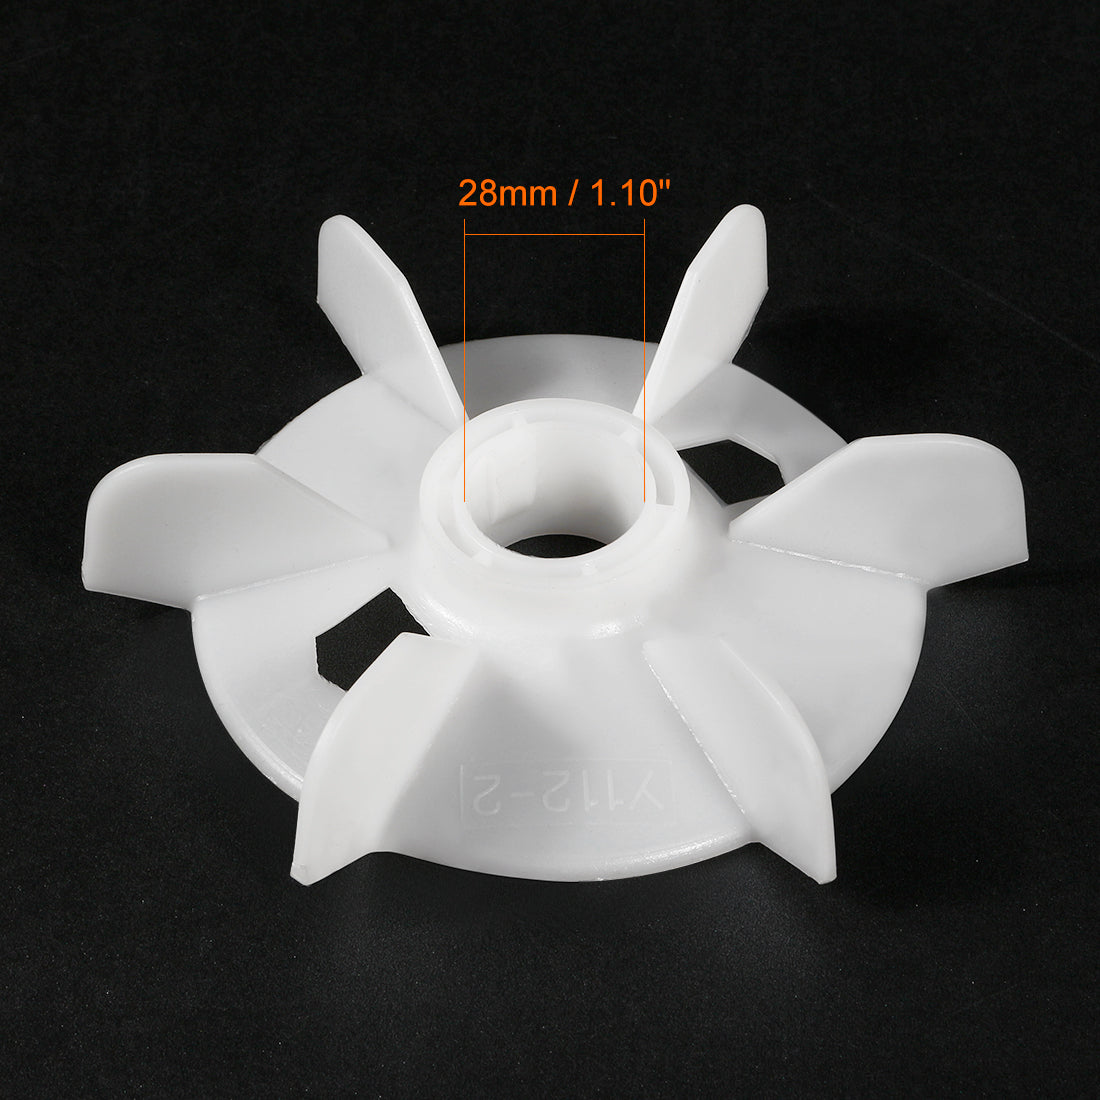 uxcell Uxcell 4Pcs 150*28mm Round Shaft Replacement White Plastic 6 Impeller Motor Fan Vane